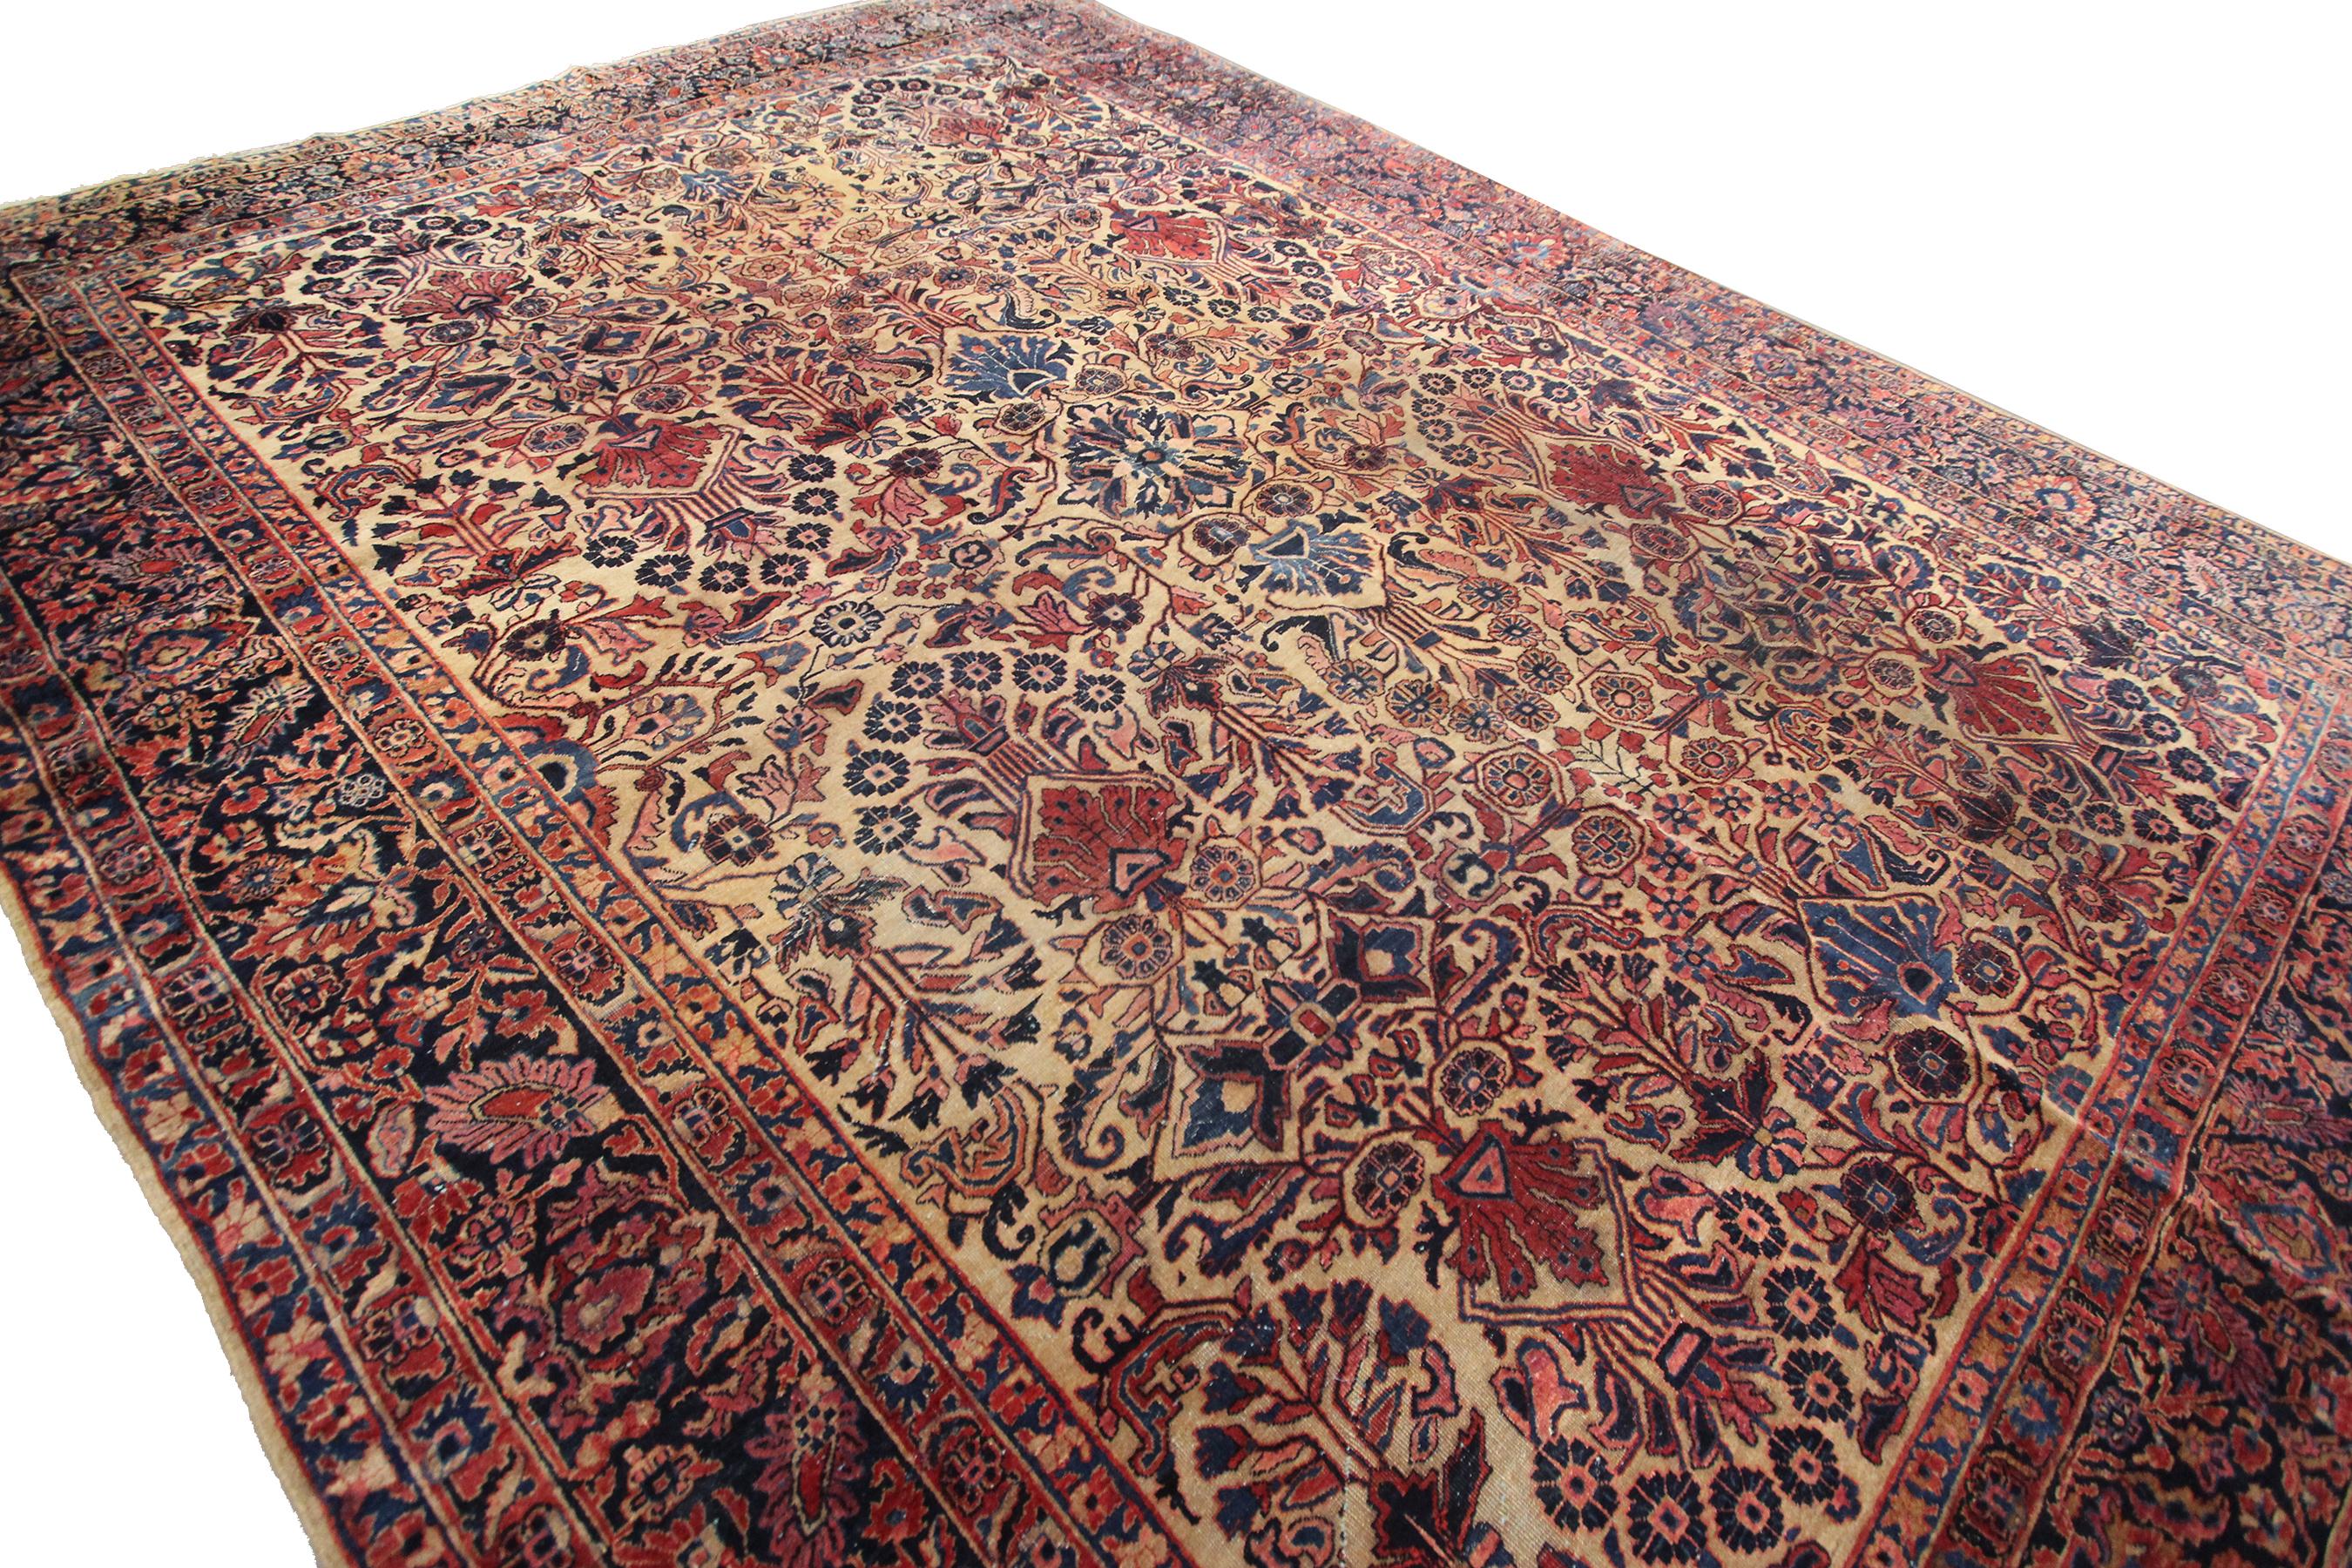 Antique Mohajeran Rug Antique Persian Rug Geometric Floral Gold, 1890 For Sale 5